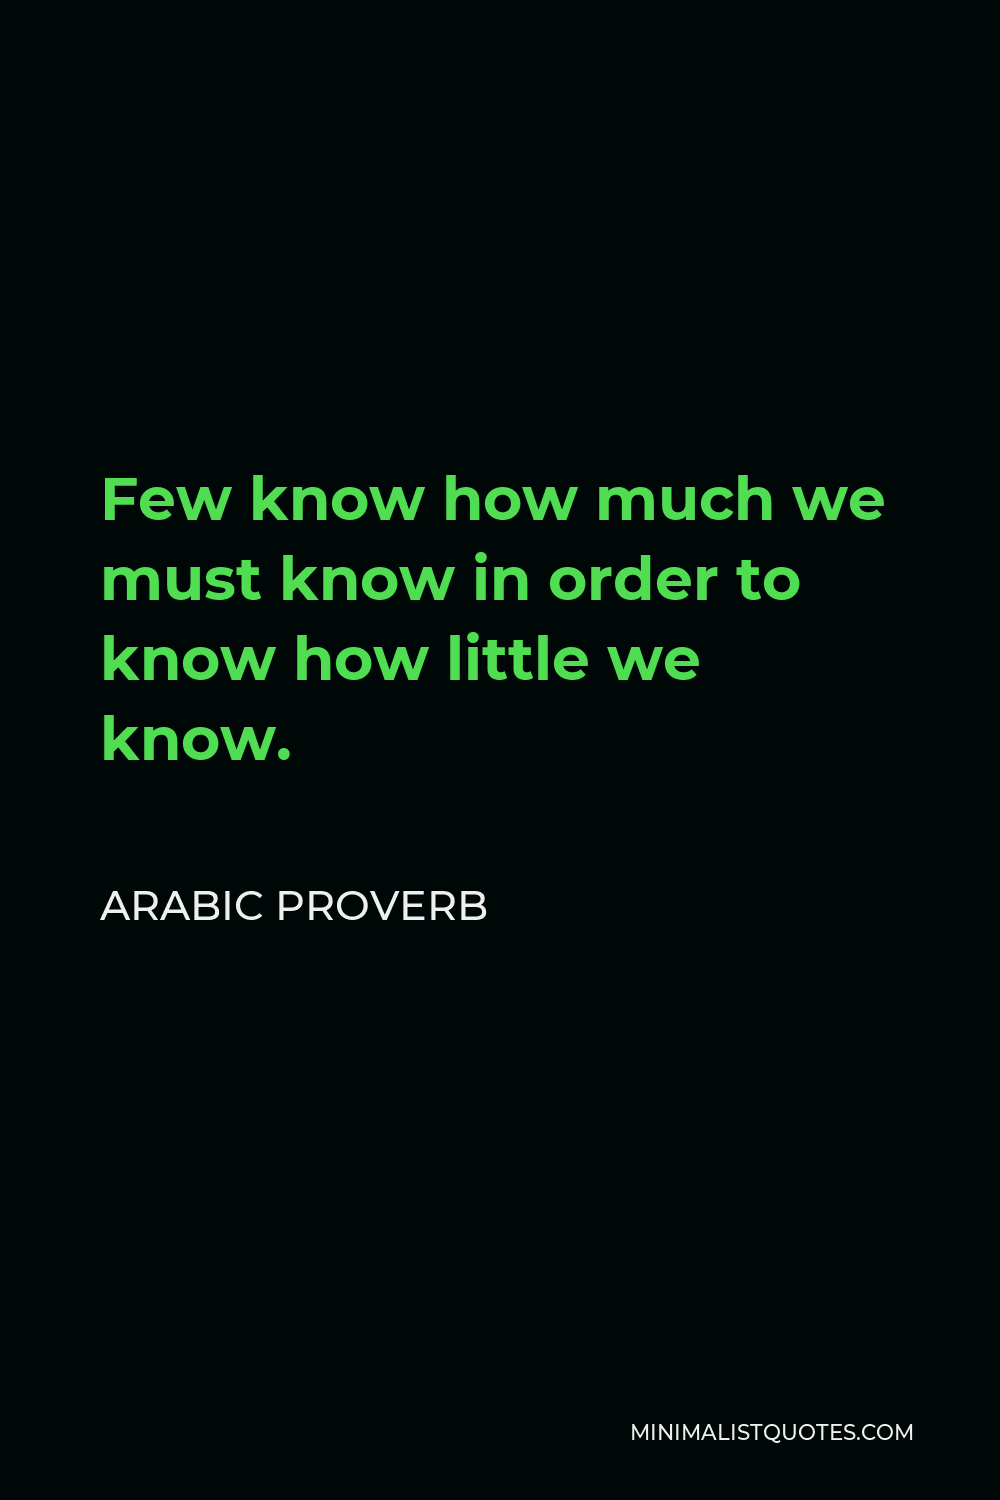 Arabic Proverb Quote - Few know how much we must know in order to know how little we know.